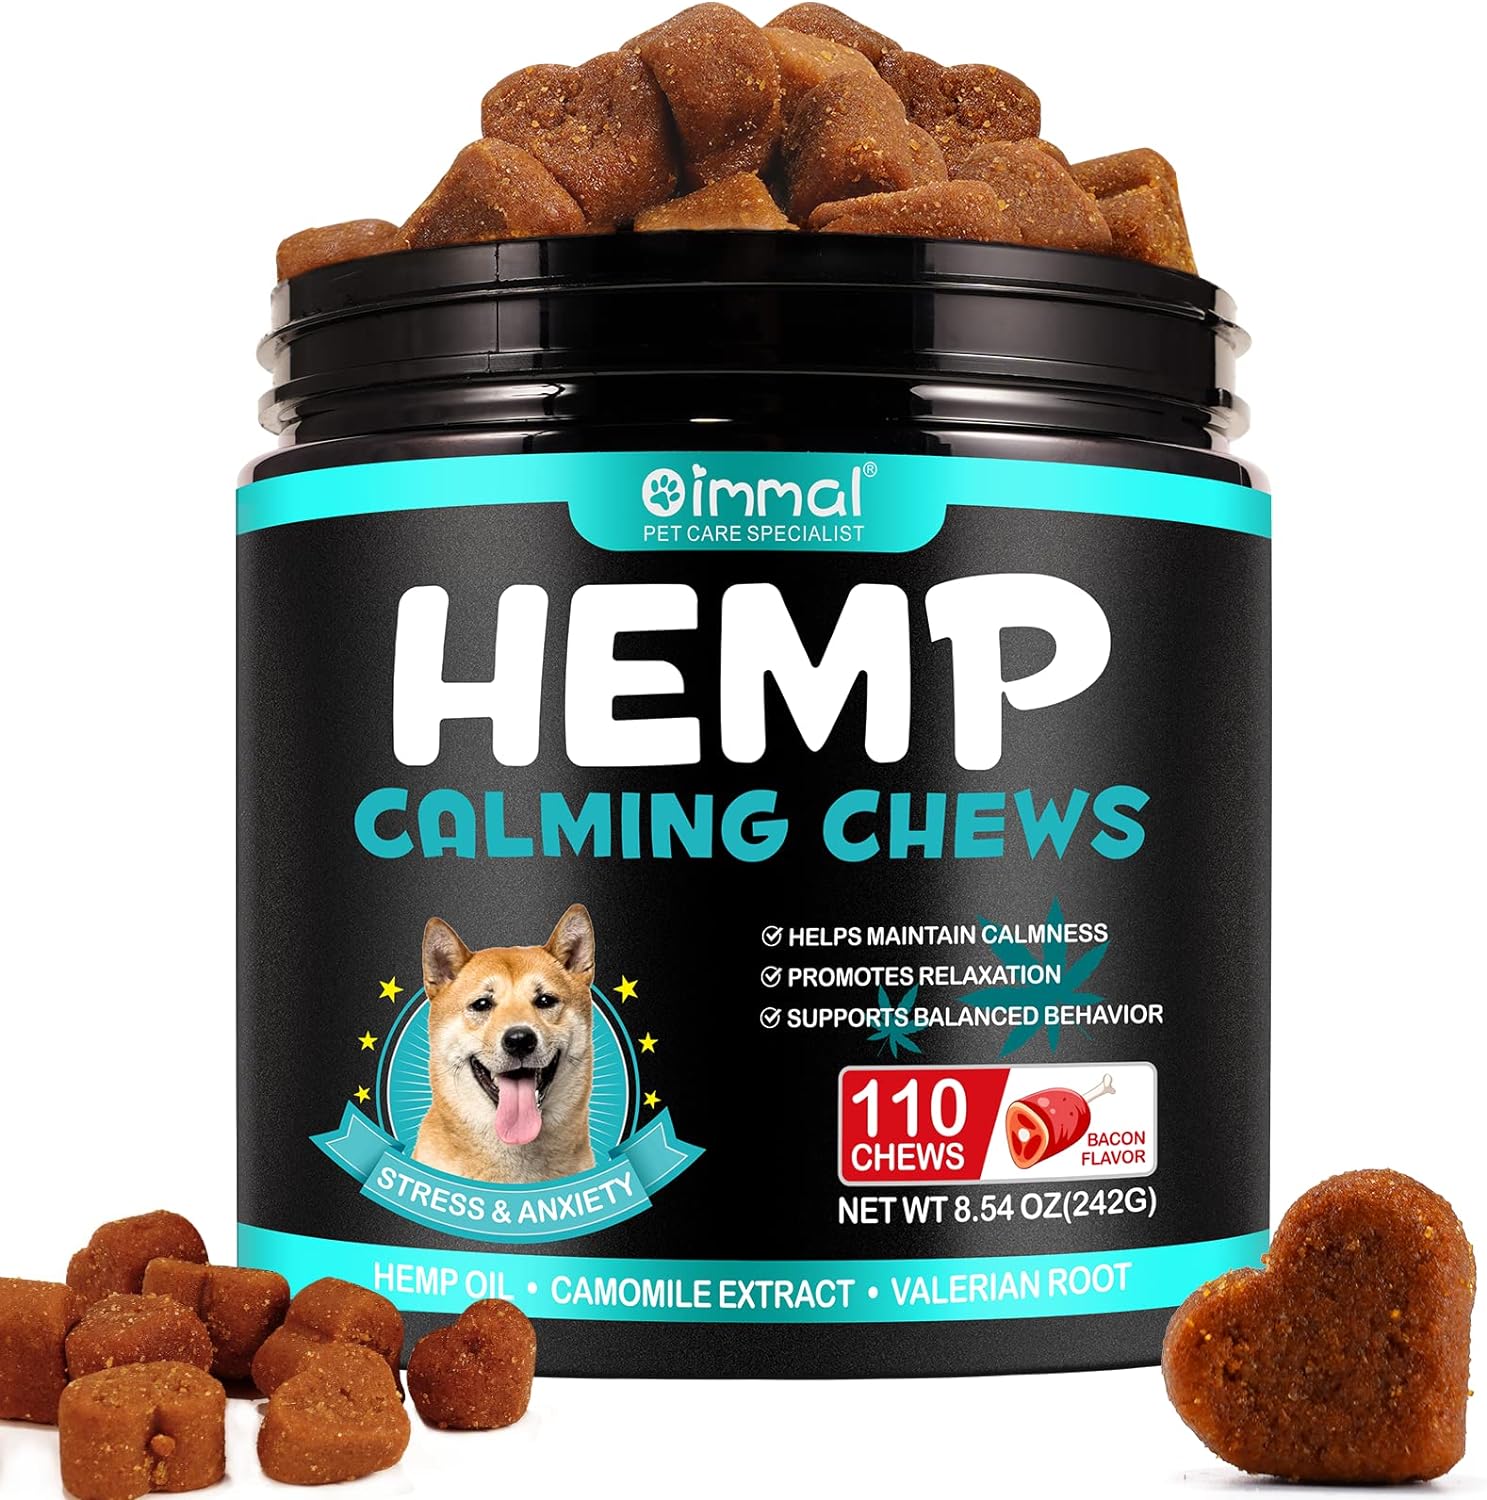 Calming Chews for Dogs, Dog Calming Chews - Anxiety Relief Treats, Aid with Separation, Barking, Stress Relief, Thunders